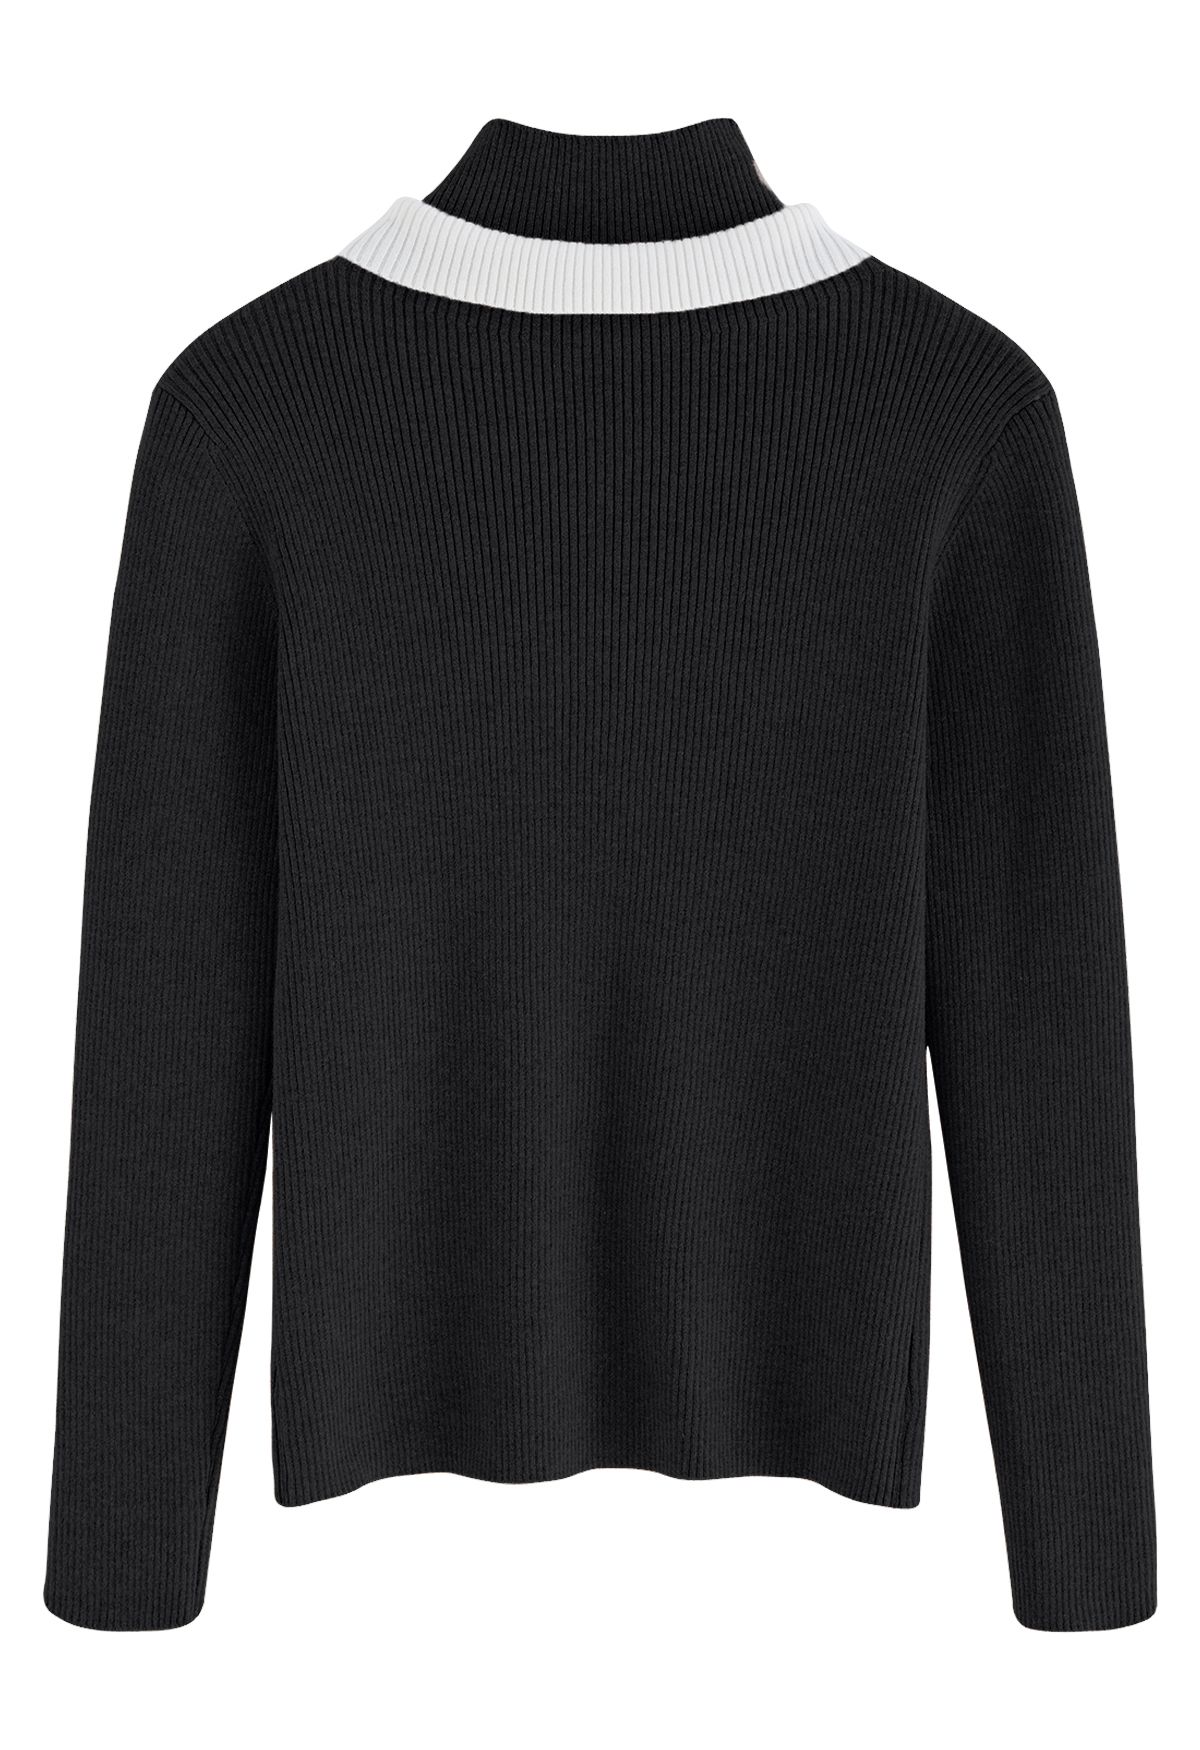 Contrast Doll Collar Mock Neck Knit Top in Black